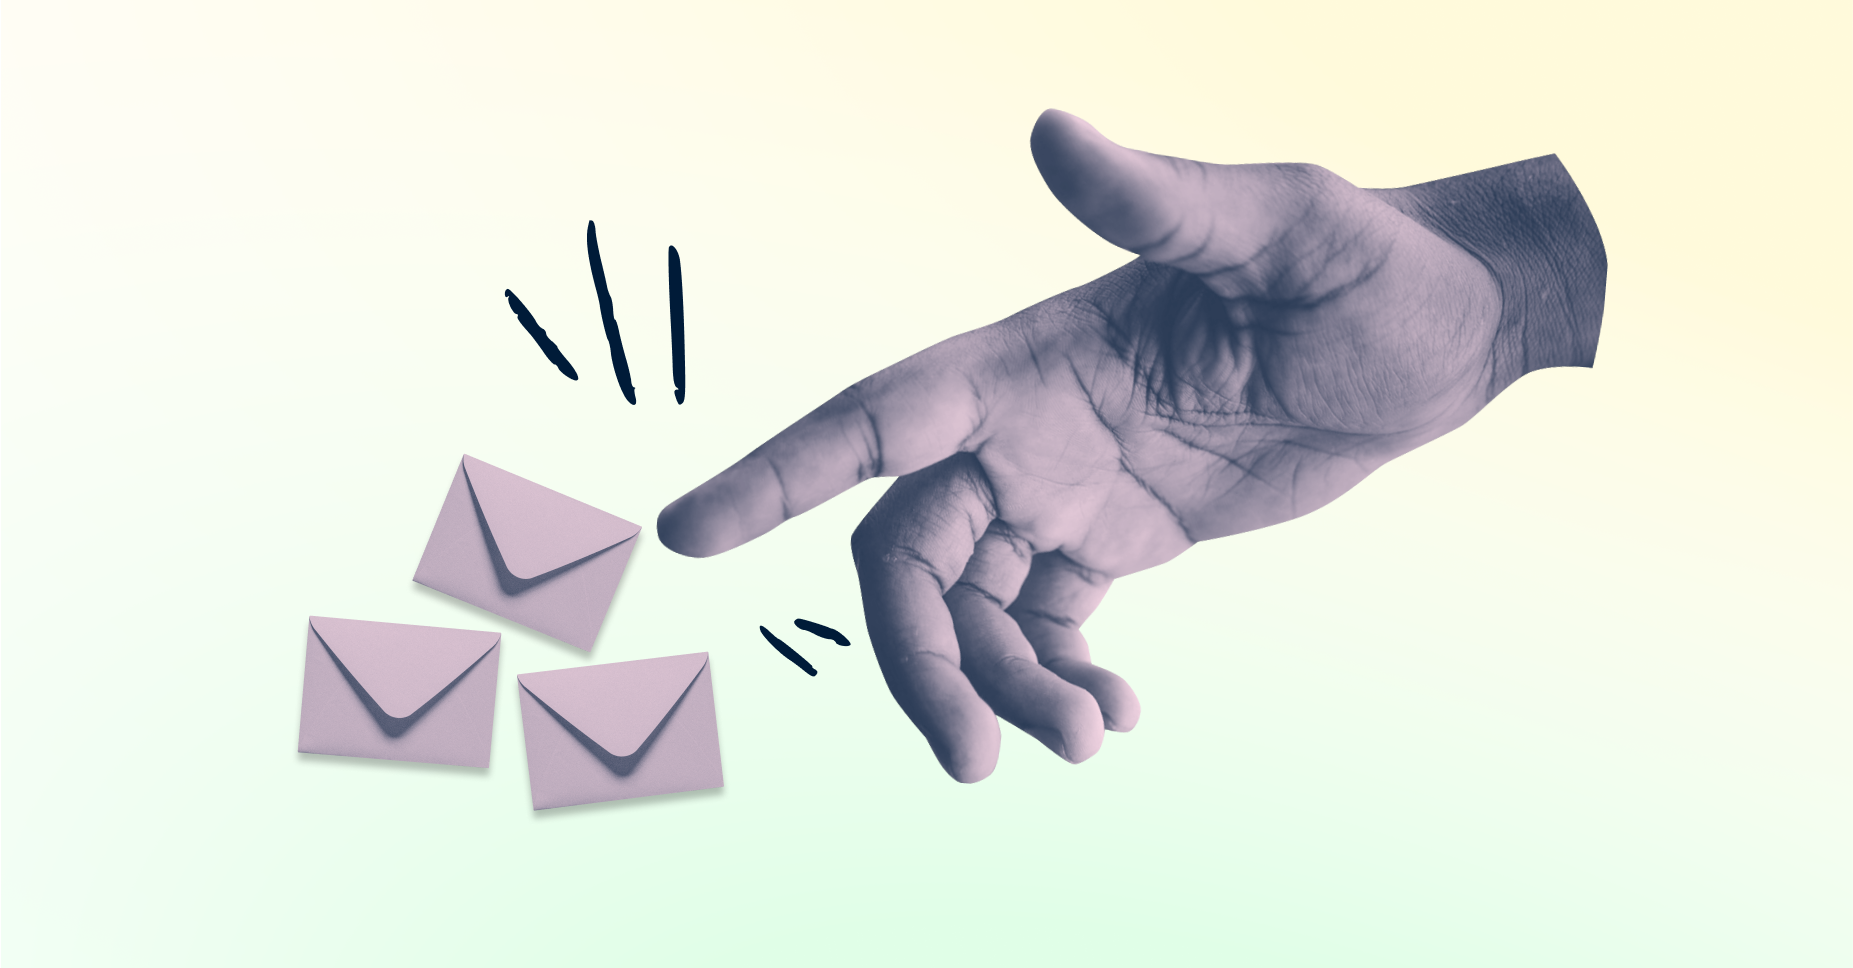 Deadline reminder email samples: How to give a gentle nudge